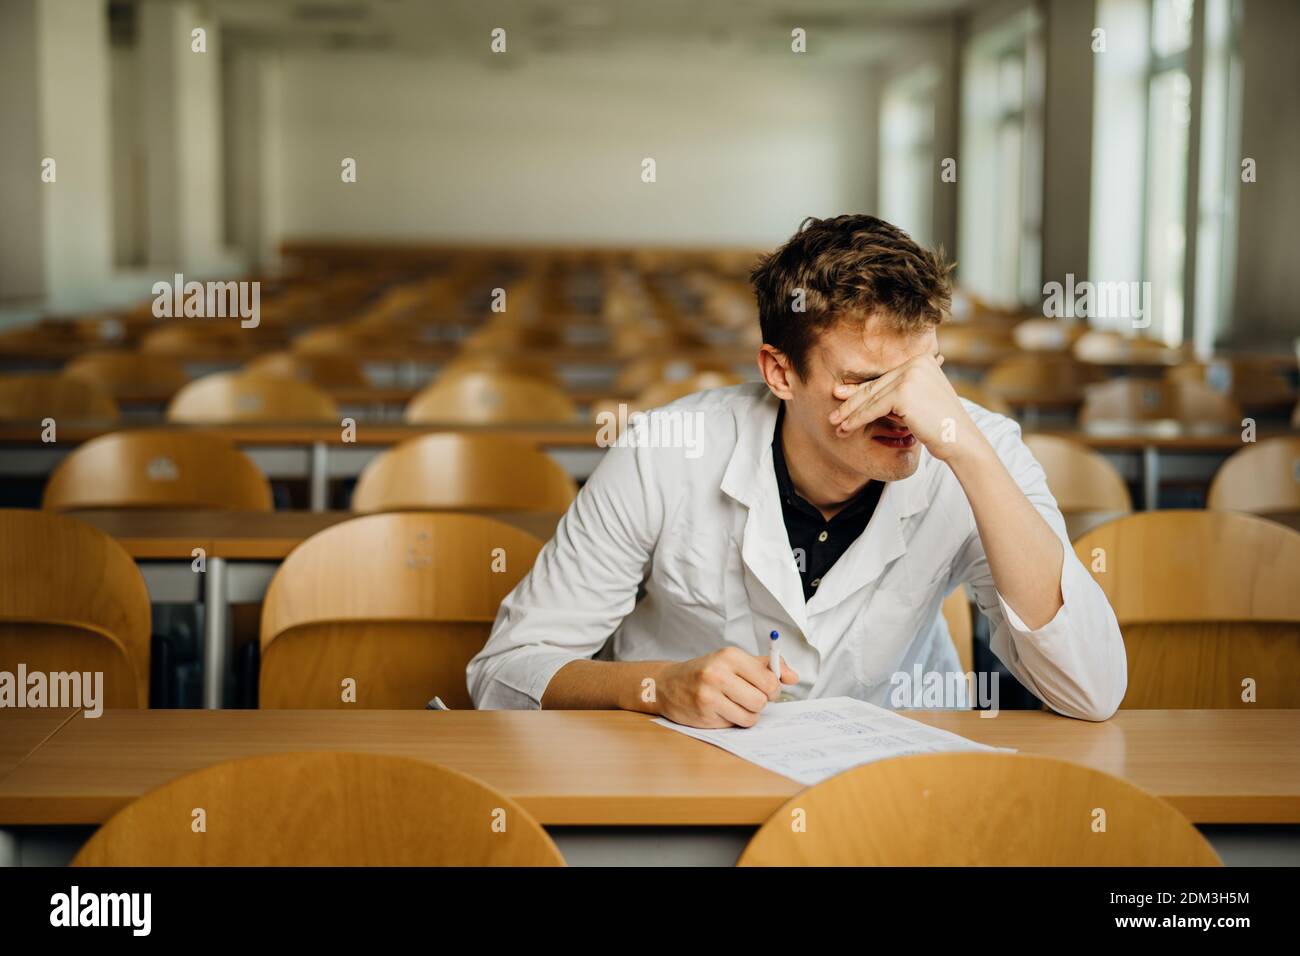 Medical professional filling out a document, looking exhausted, tired. Doctor writing an opinion.Medicine exam, medical practitioner taking test evalu Stock Photo